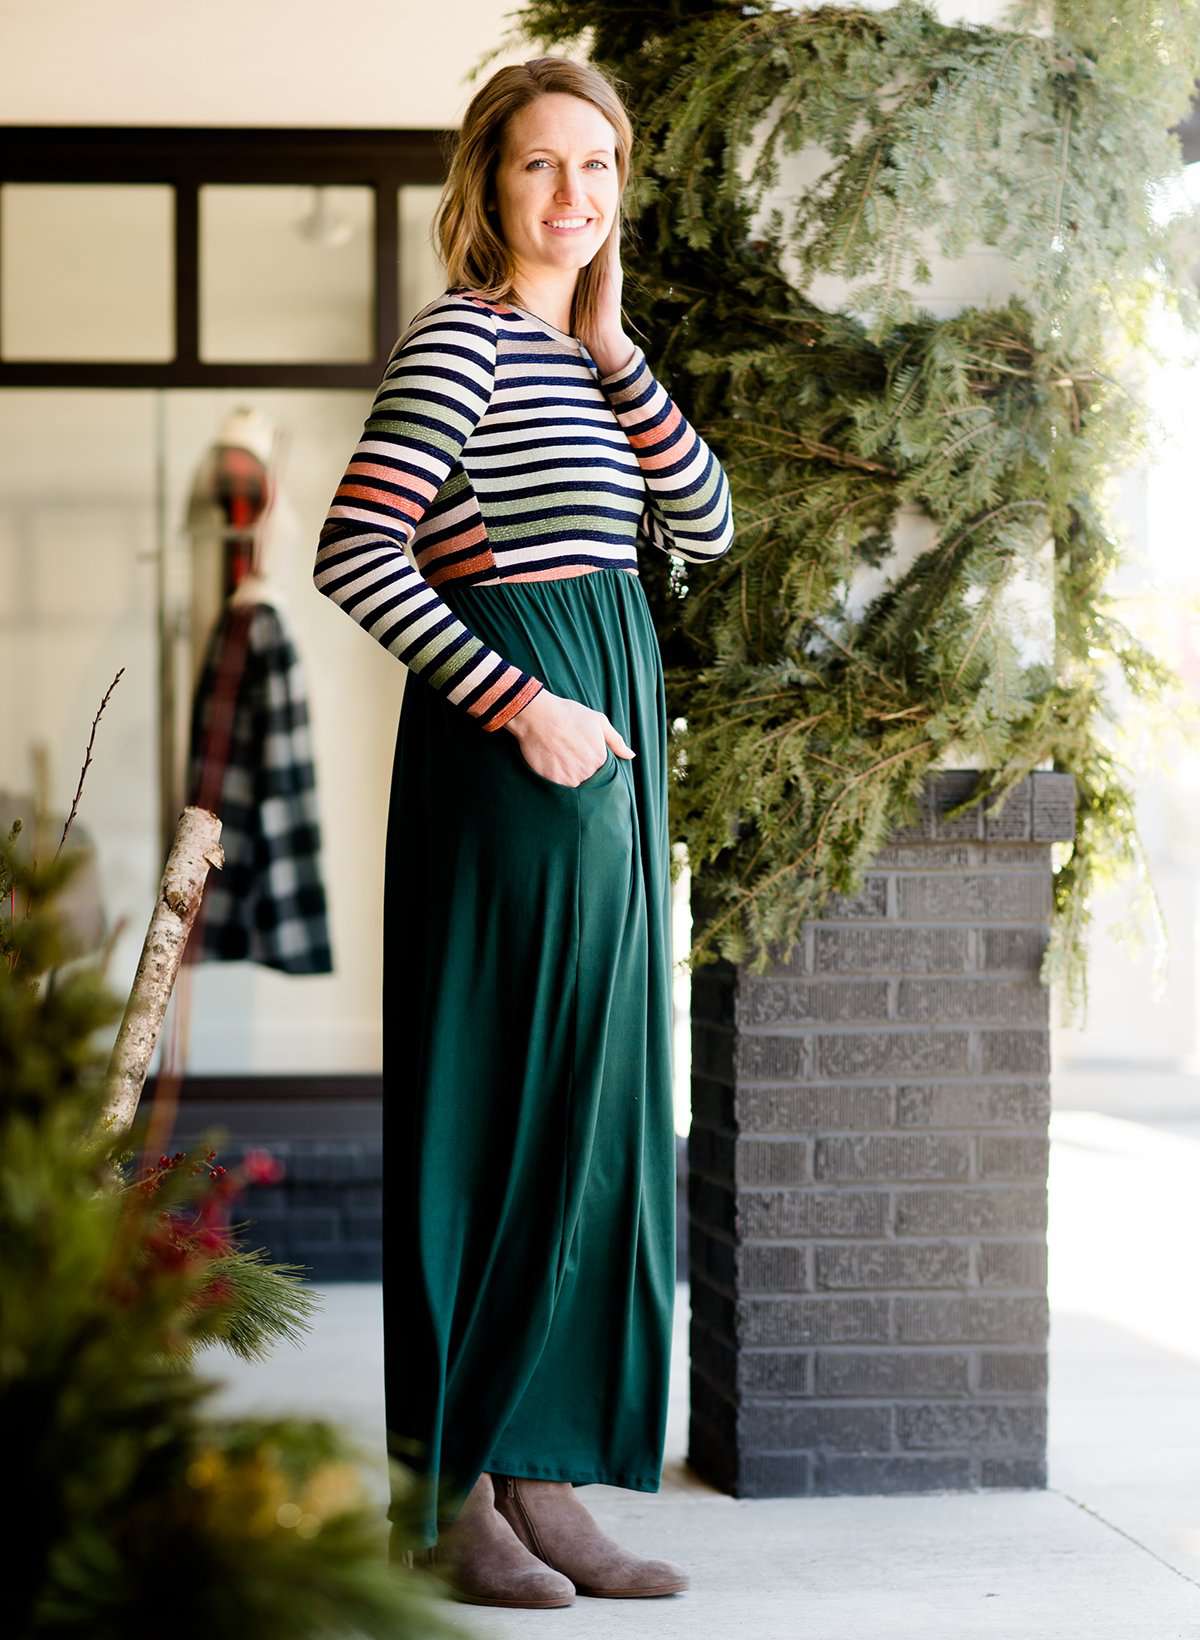 Woman wearing a striped top and solid hunter green bottom maxi dress.